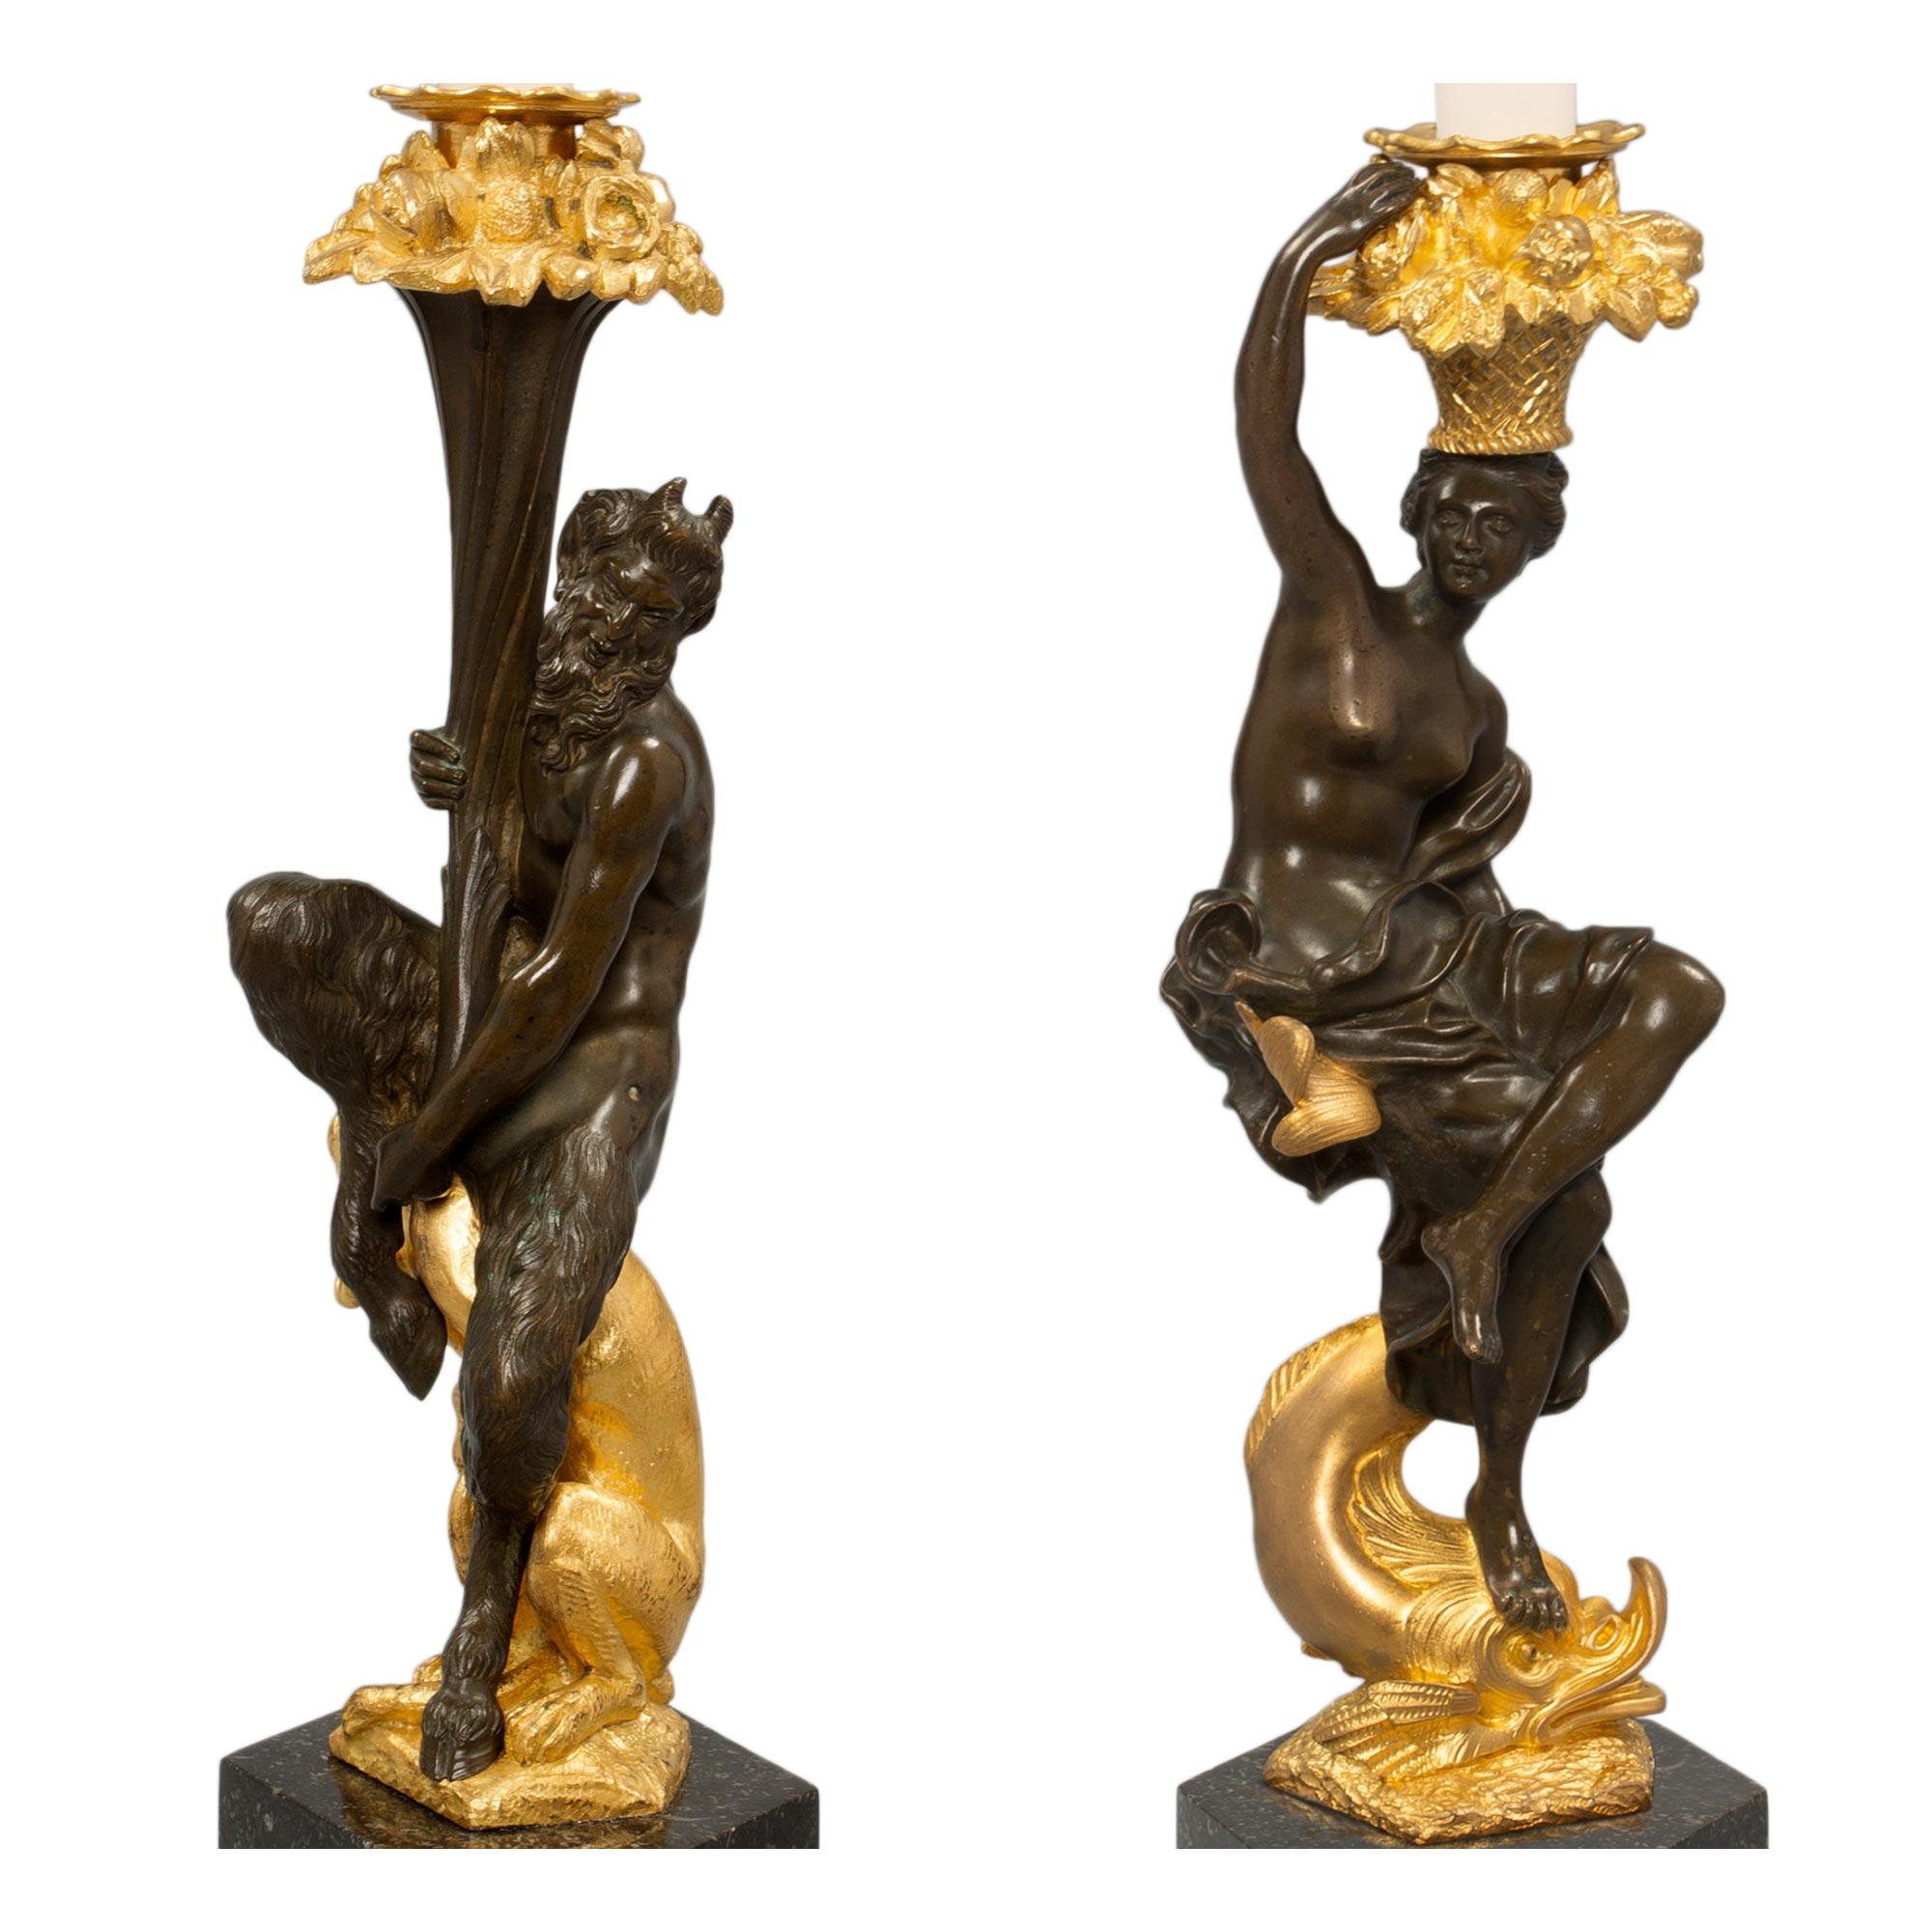 An outstanding true pair of French 19th century Renaissance st. patinated bronze, ormolu and Belgian Granite candlesticks. Each candlestick is raised by hexagonal granite bases with a bottom wrap around mottled ormolu band and six finely scrolled